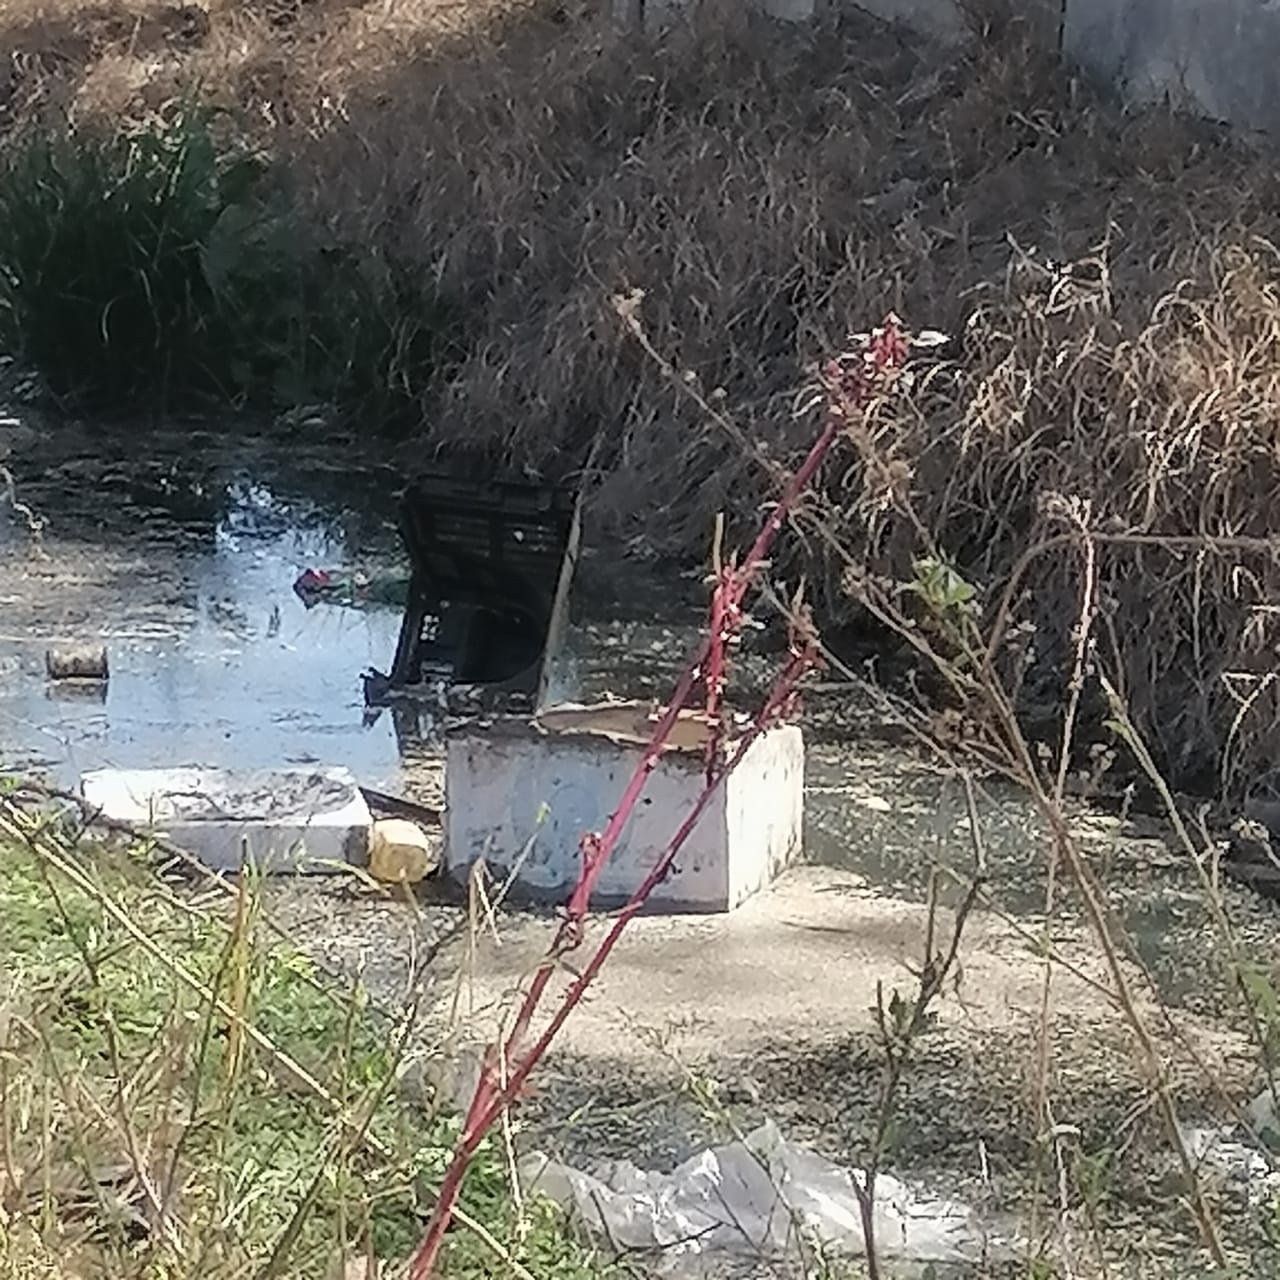 Sekhukhune District Municipality’s has ignored directives from the Department of Water and Sanitation to clean up their act is, is appalling.